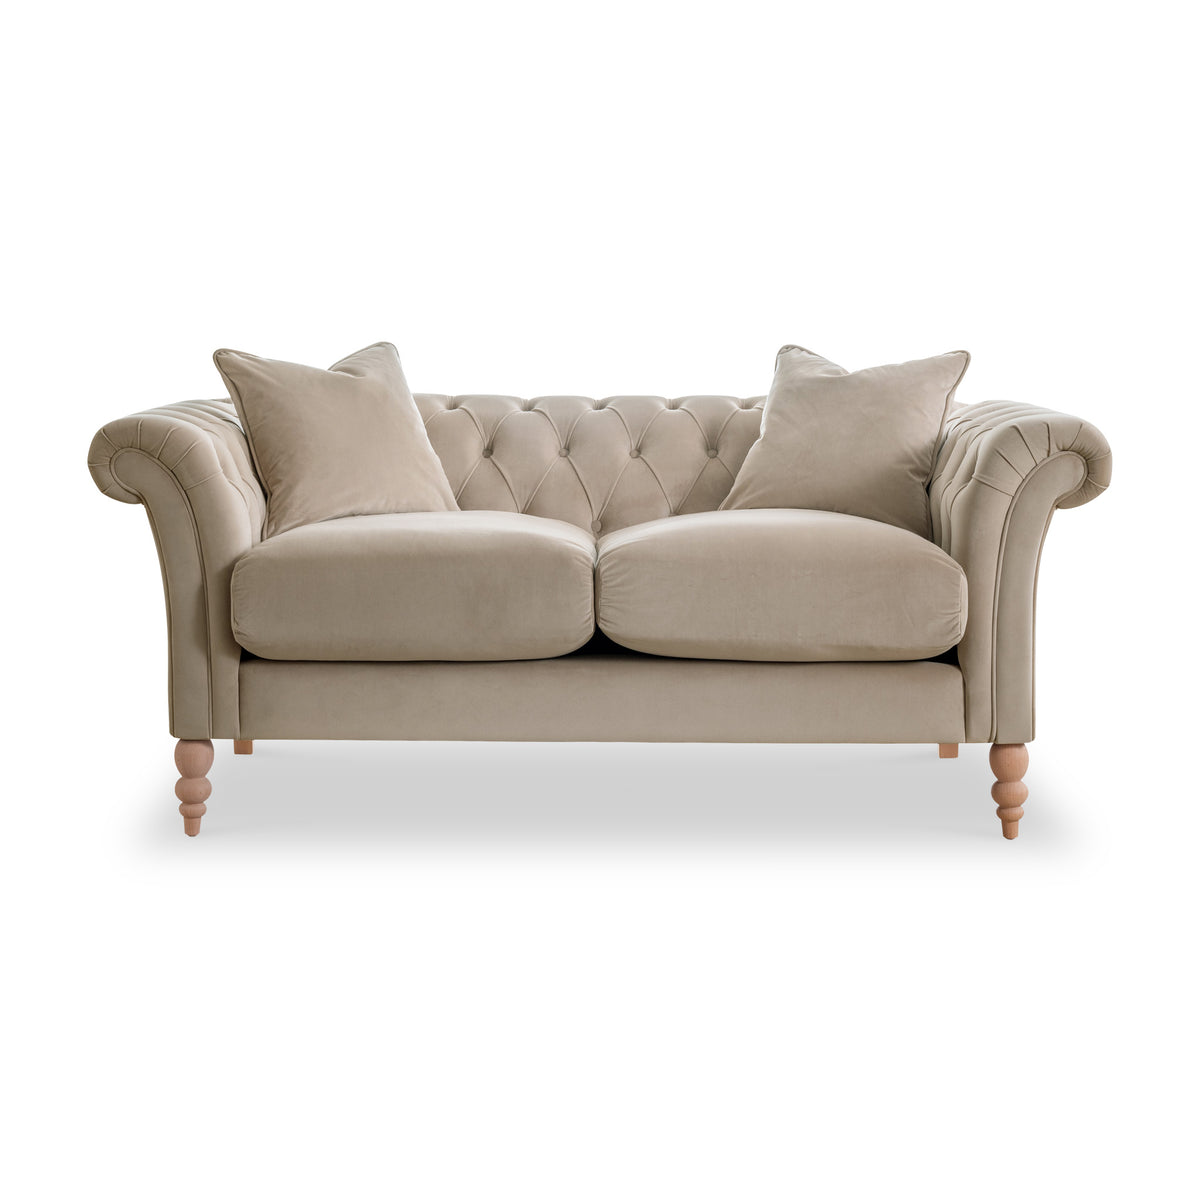 Balmoral Putty Velvet Chesterfield 2 Seater Sofa  from Roseland Furniture